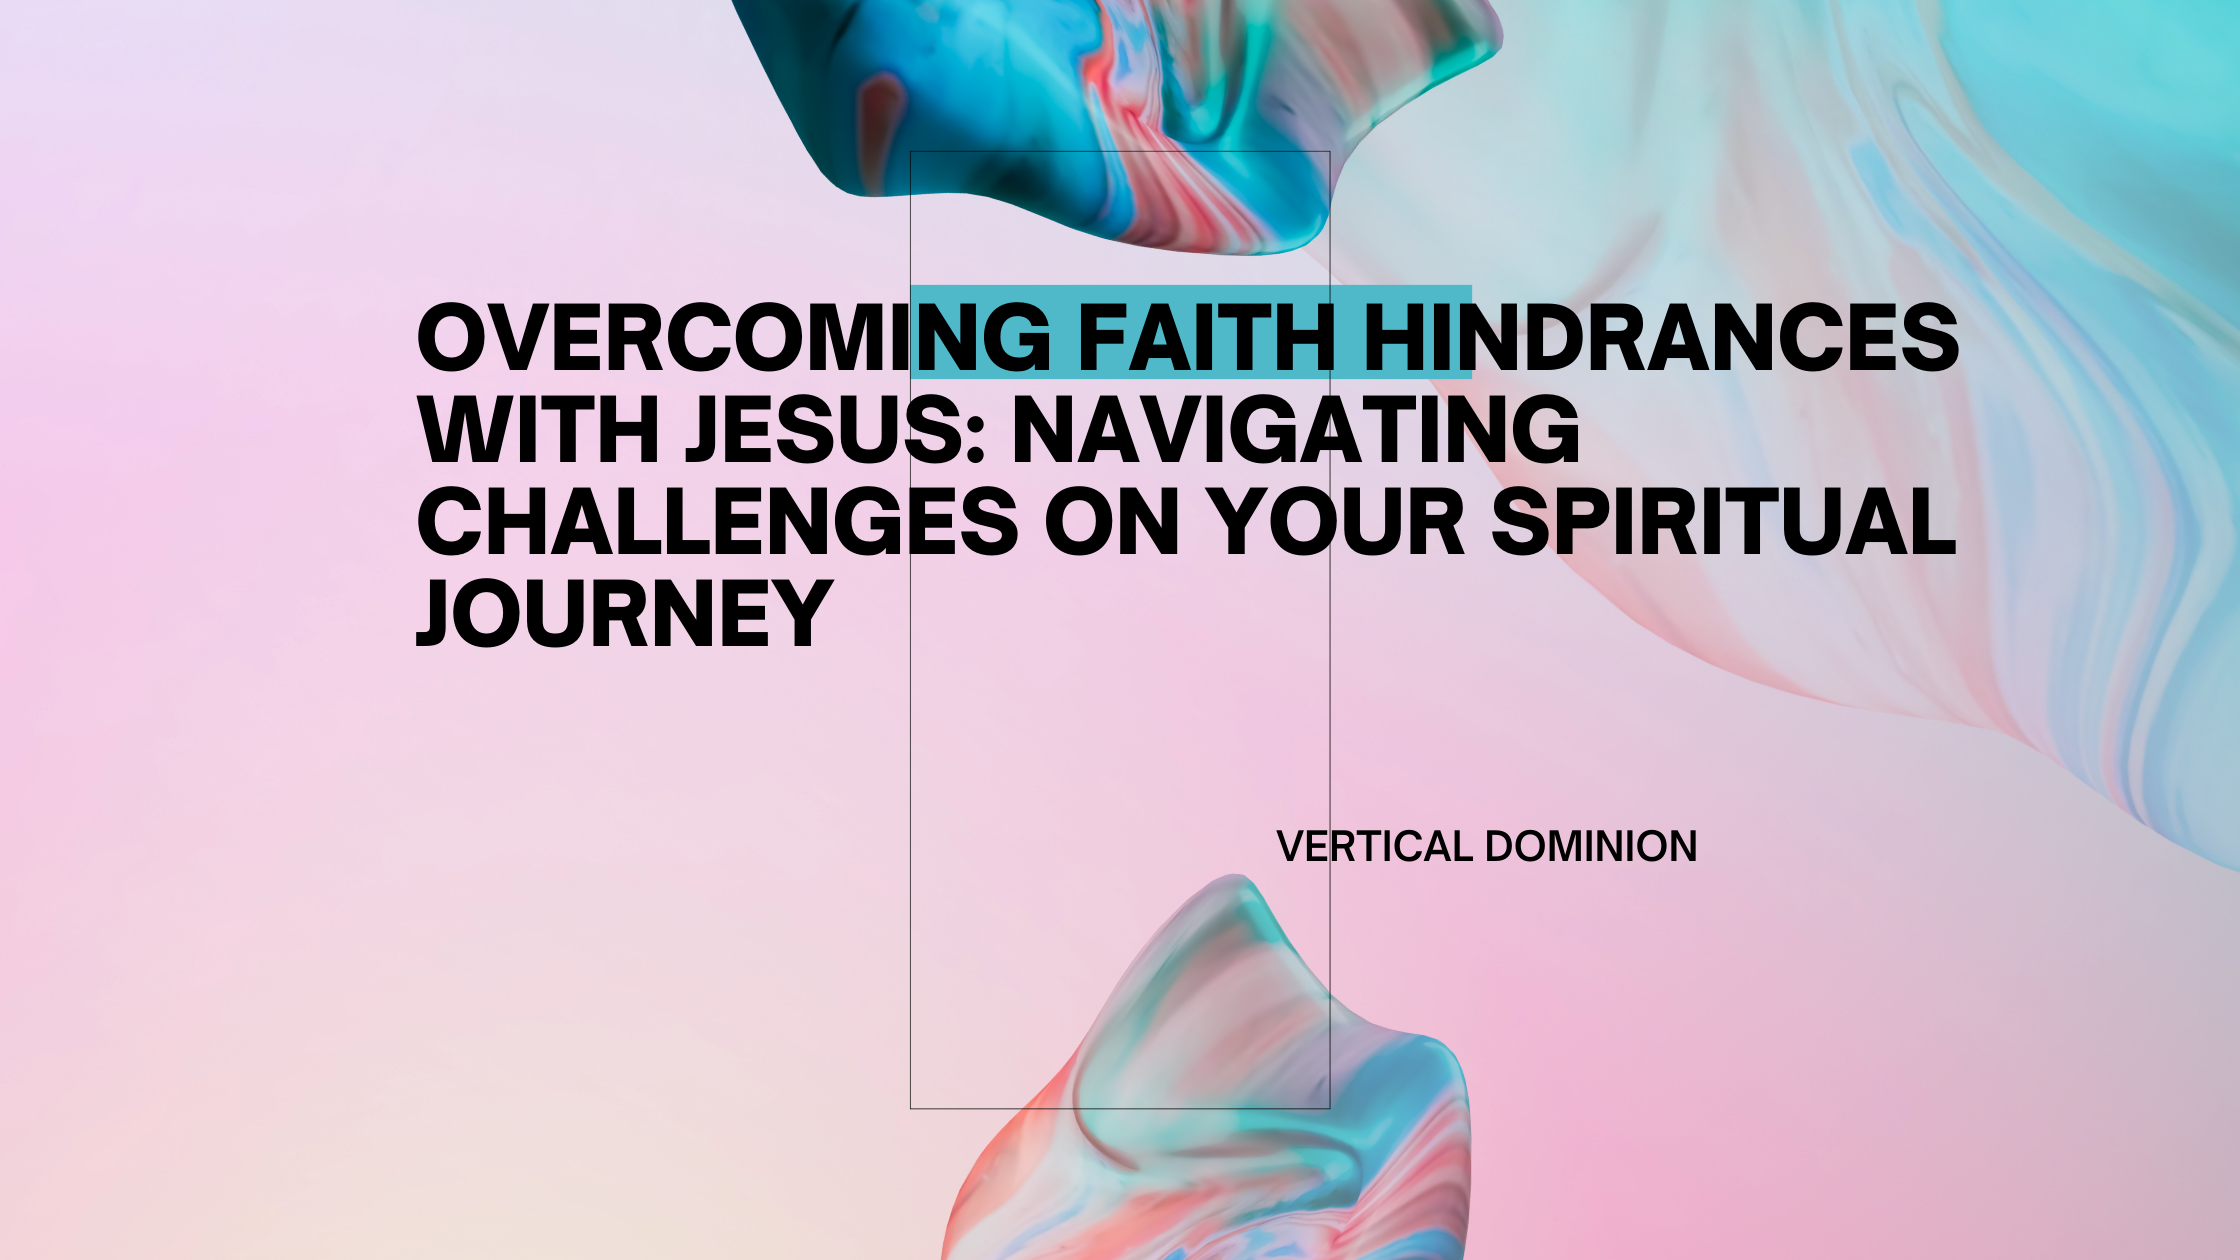 Overcoming Faith Hindrances with Jesus: Navigating Challenges on Your Spiritual Journey